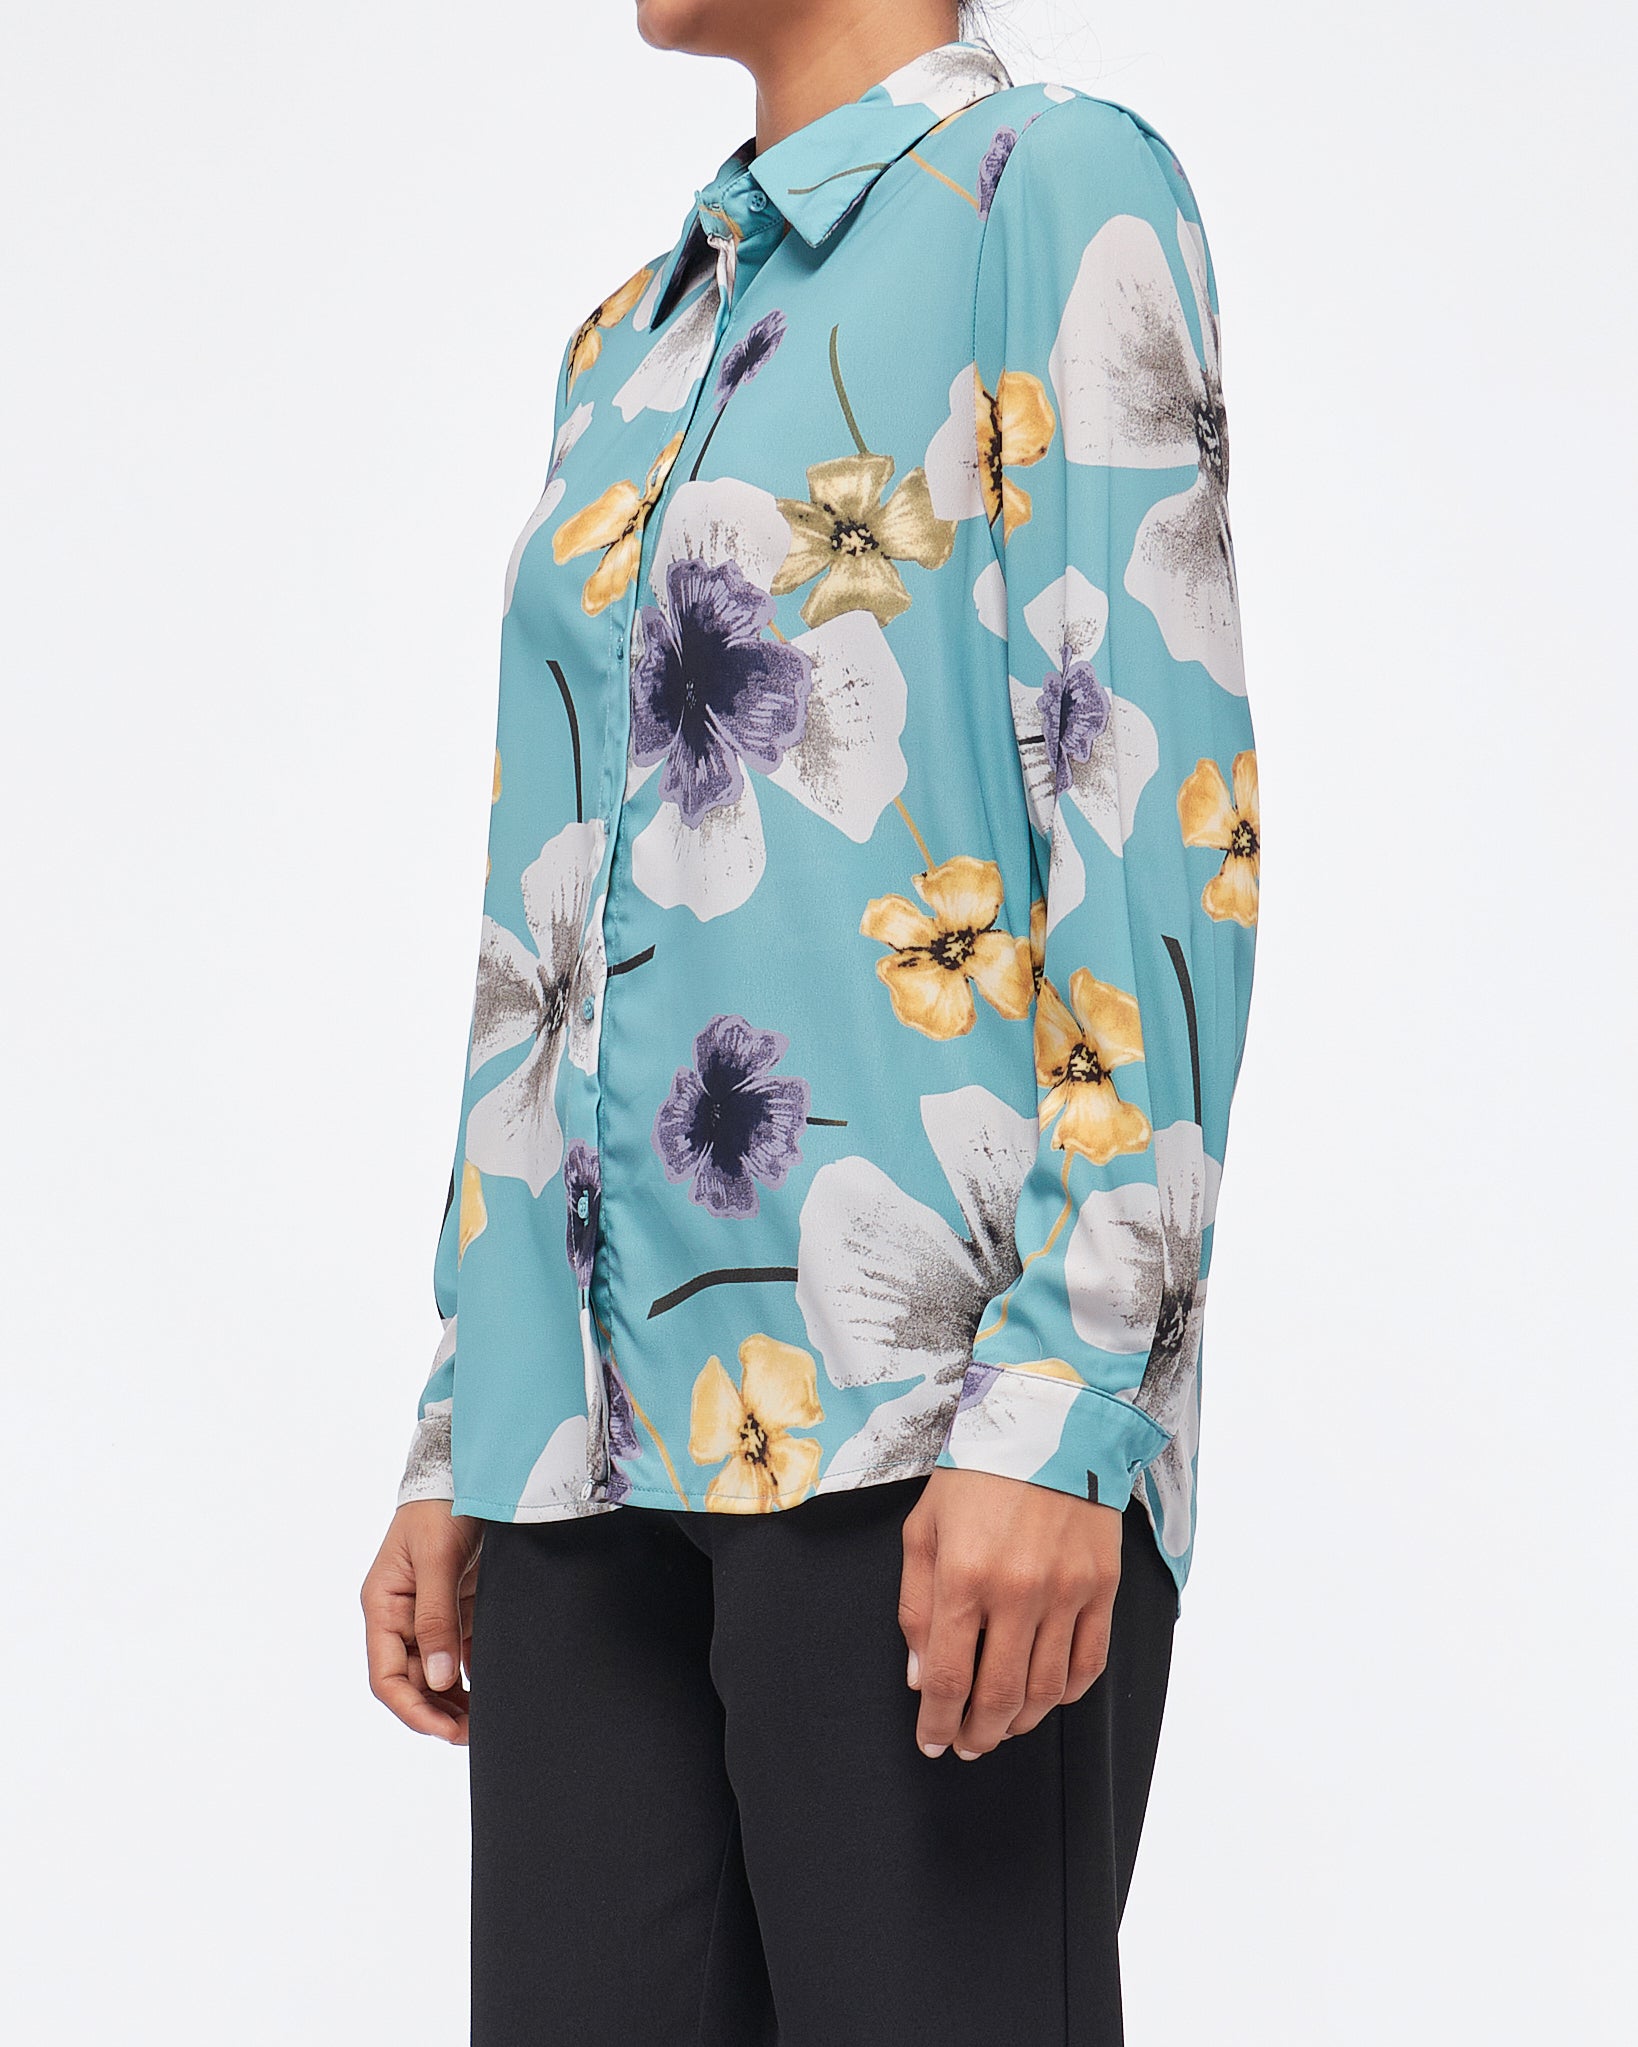 Floral Over Printed Lady Blouse 22.90